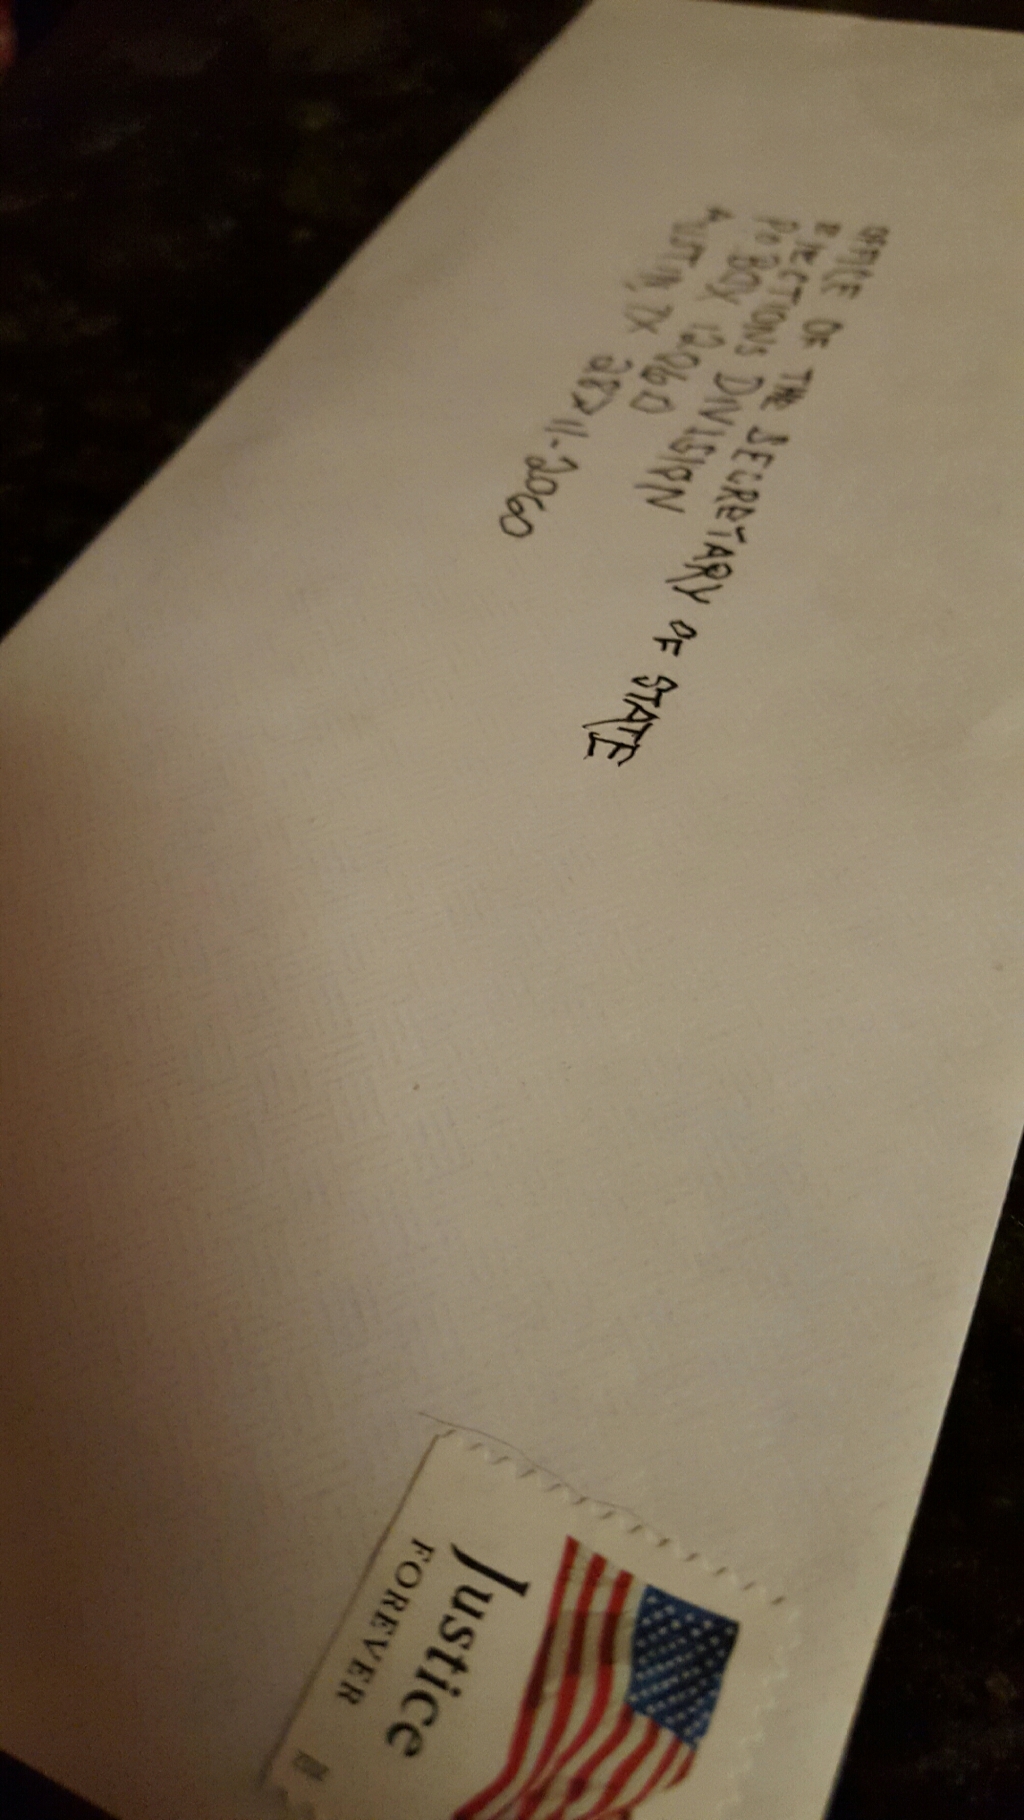 A simple piece of mail